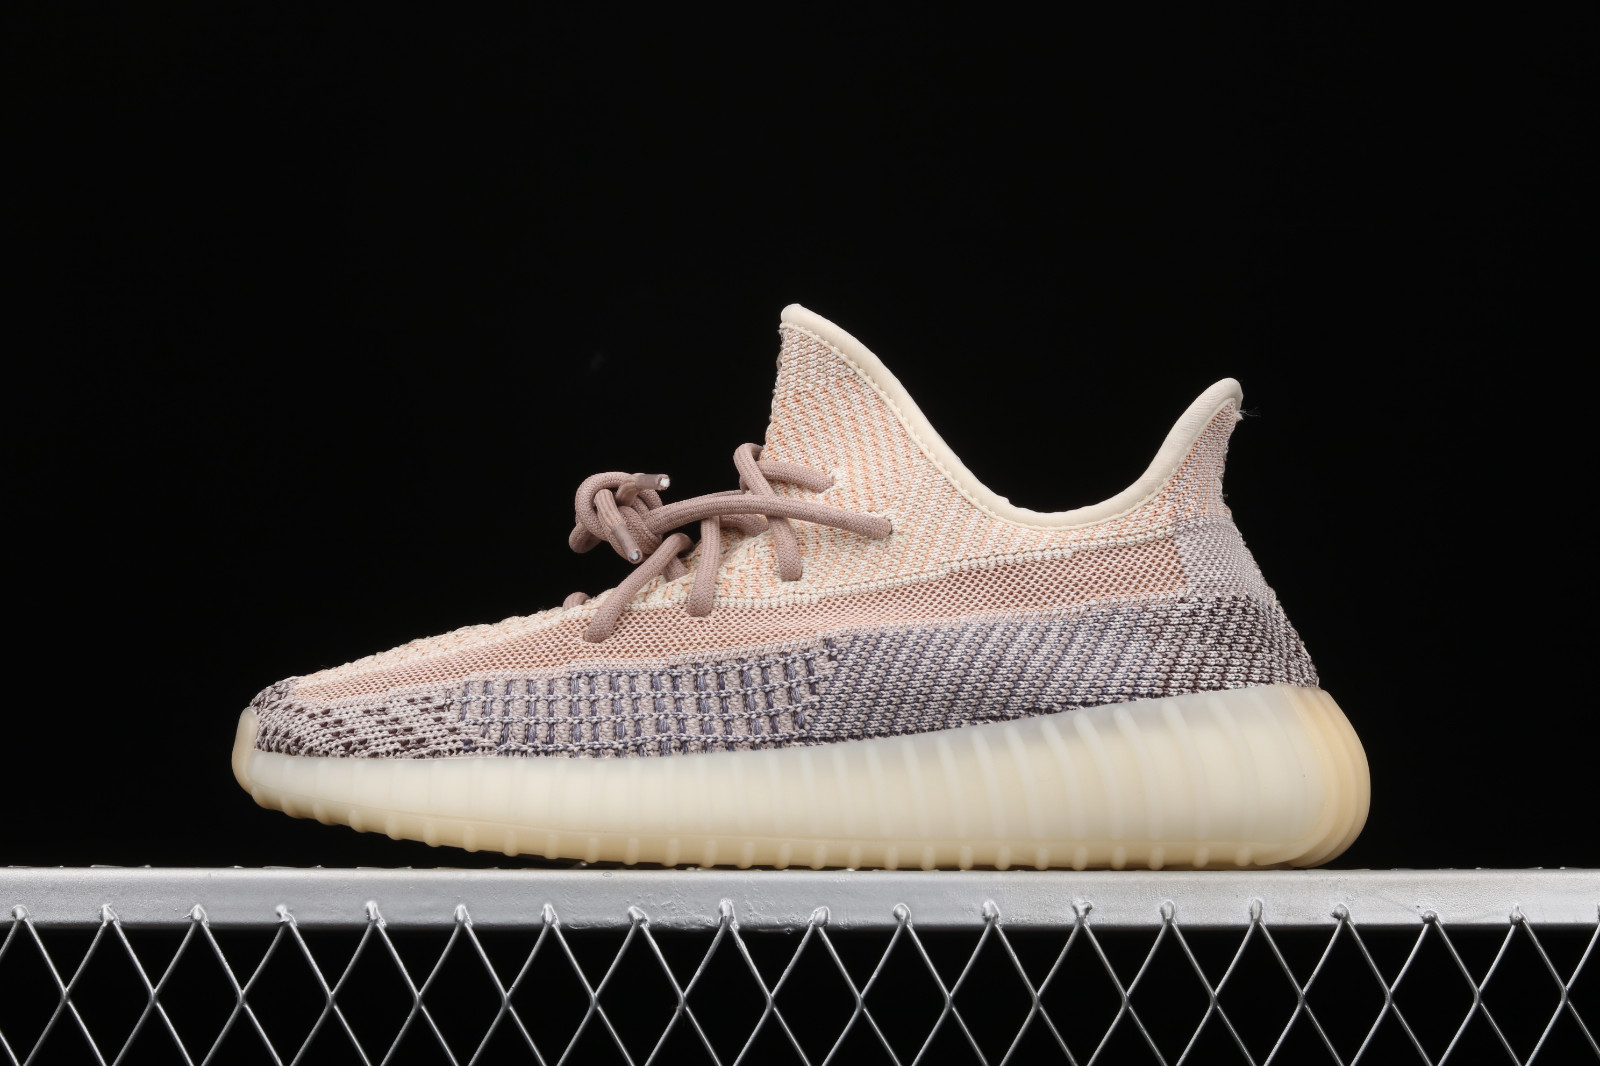 Senior citizens Constraints have mistaken Adidas Yeezy Boost 350 V2 Ash Pearl GY7658 - StclaircomoShops - Reminder  for Yeezy 350 Boost V2 "Light"